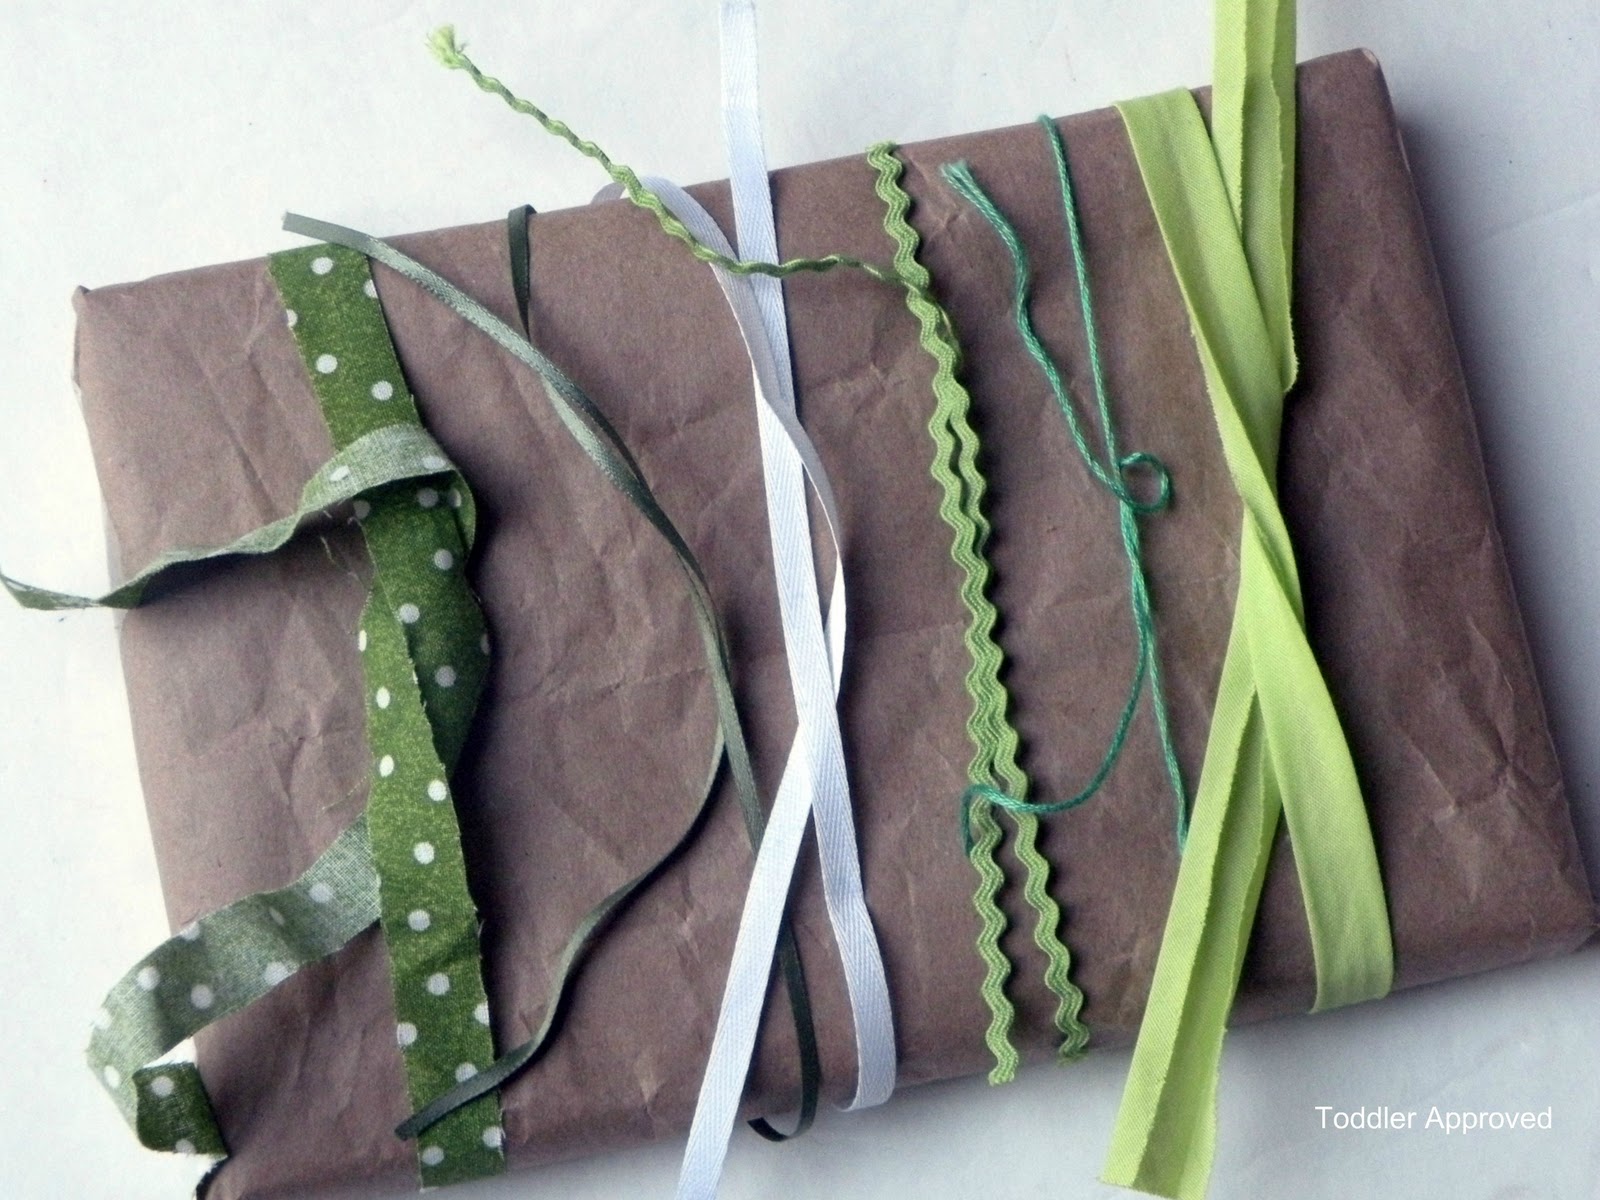 Toddler Approved! A Brown Paper Package Tied Up With Strings